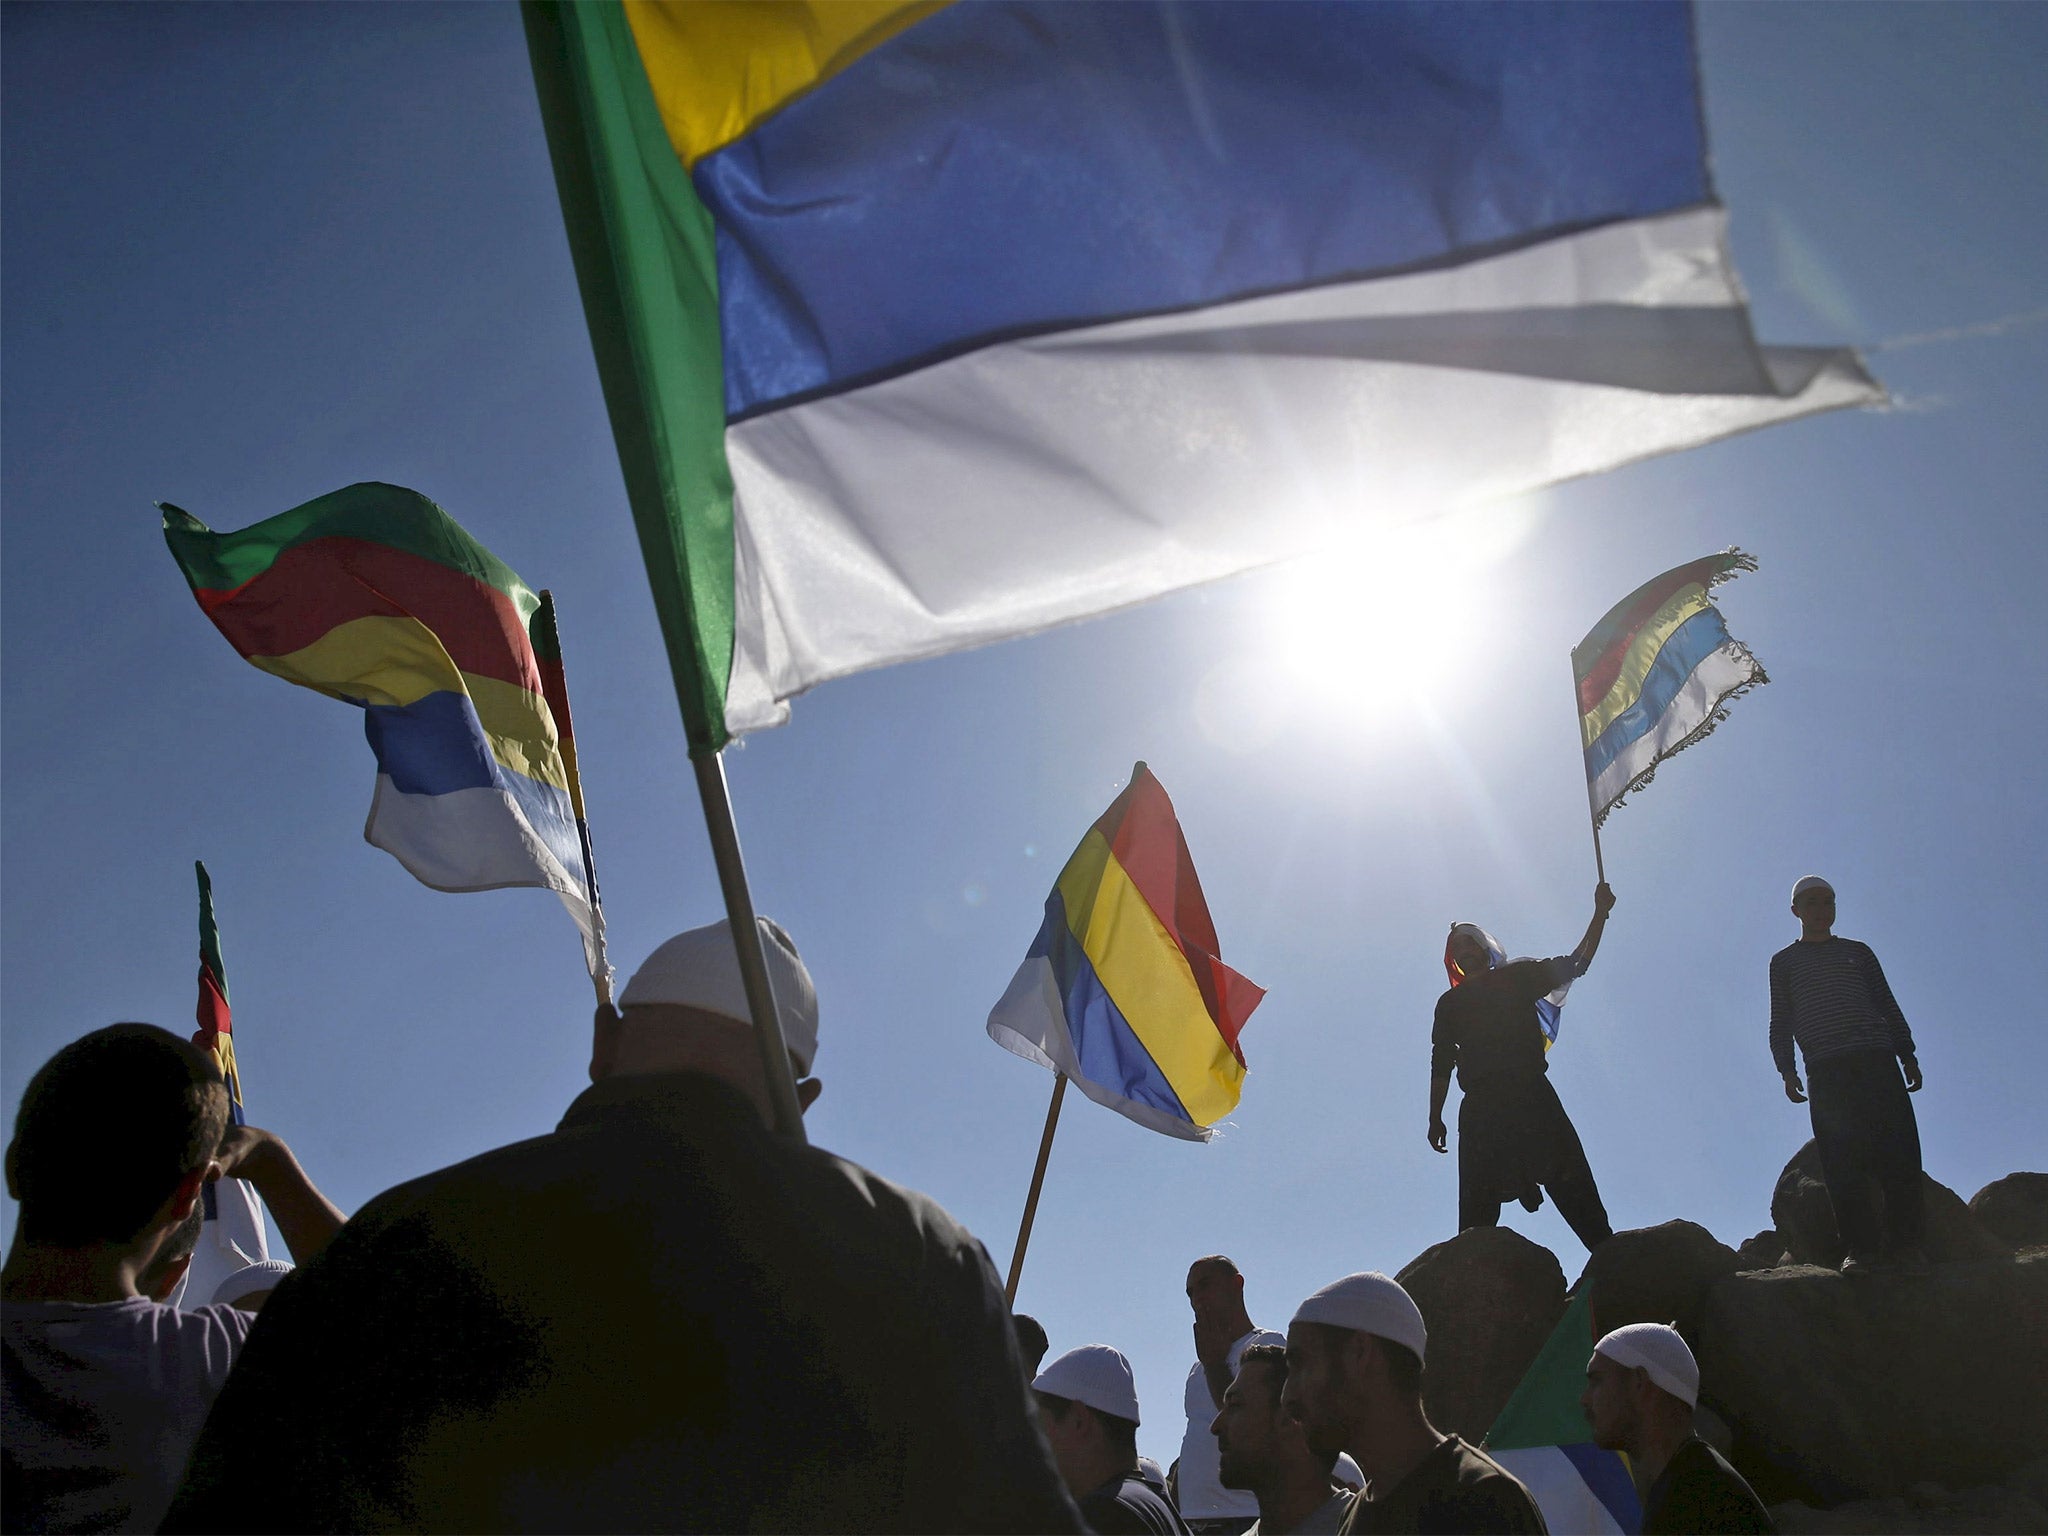 The Druze community has come under attack by pro-Assad fighters in Syria